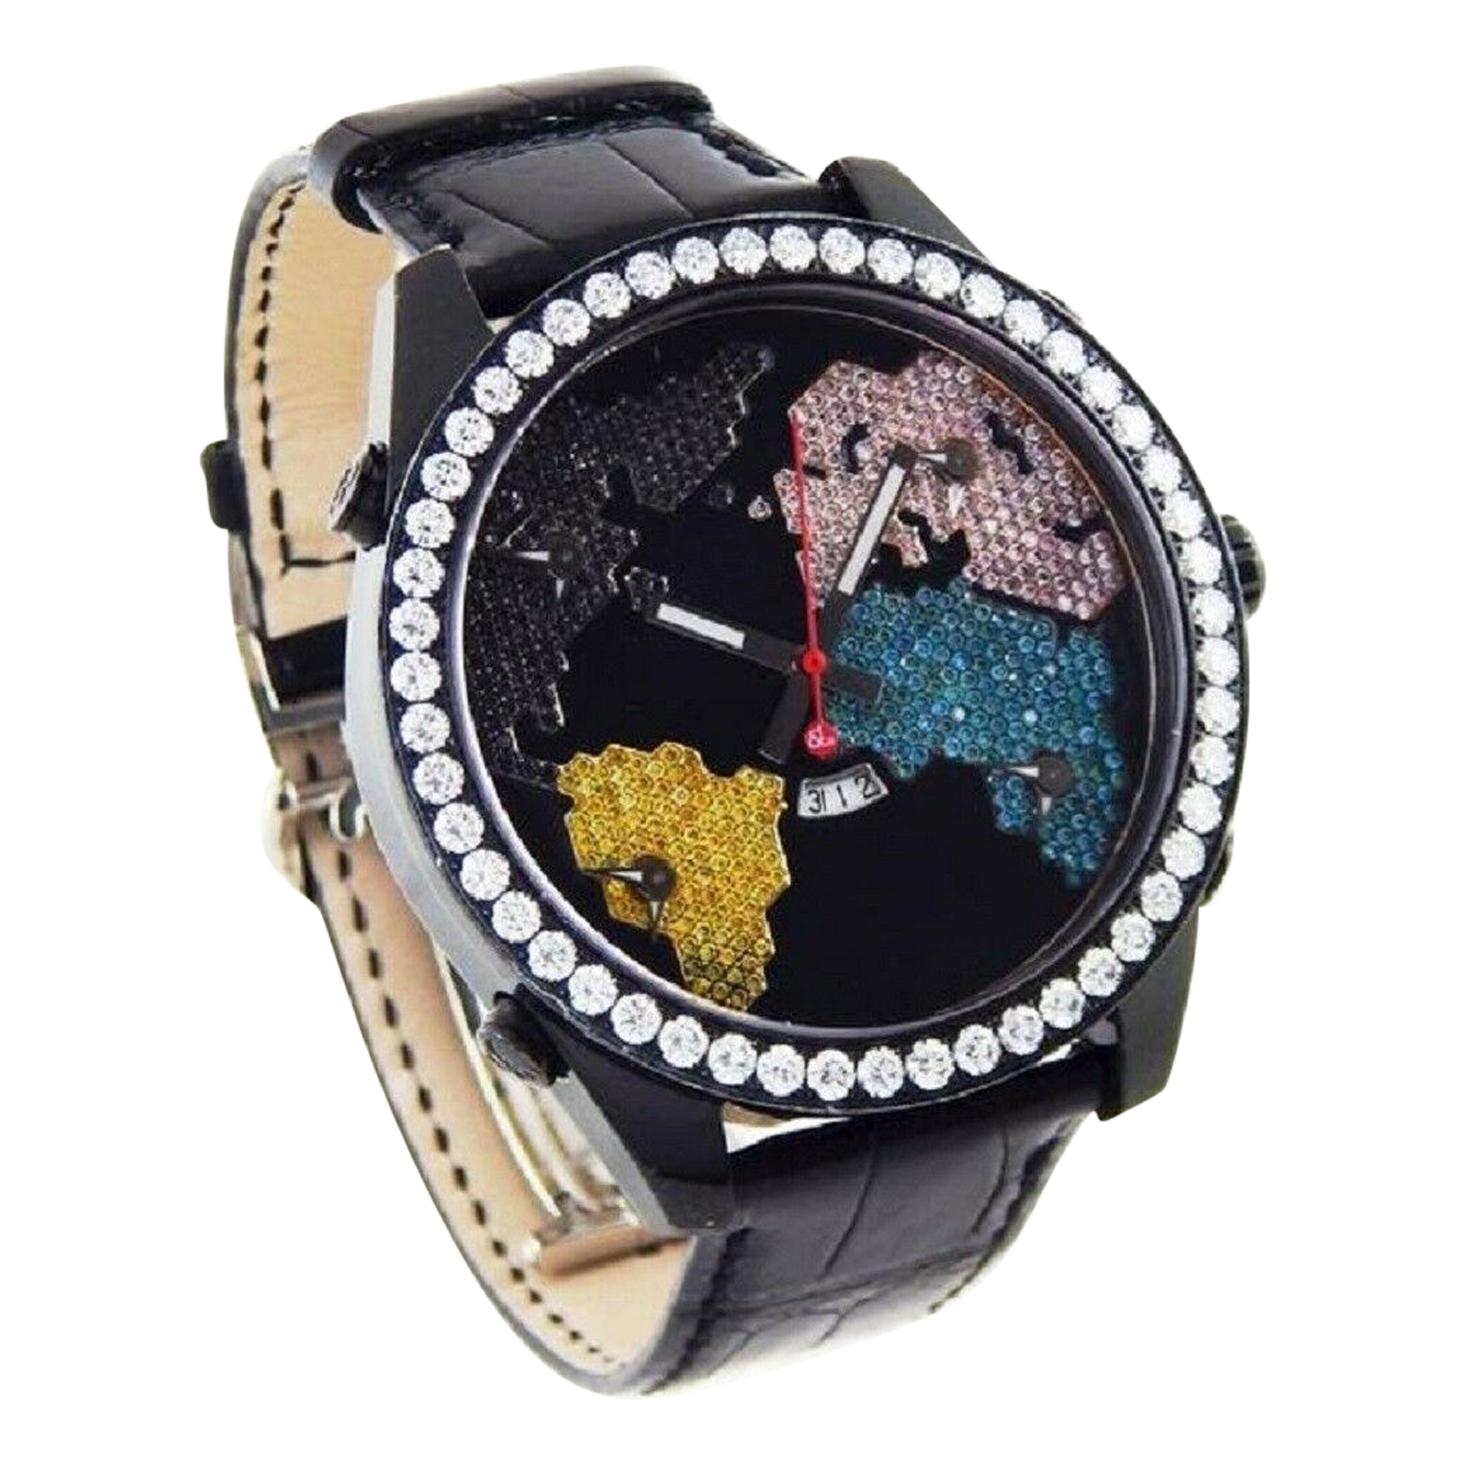 Jacob & Co. 5-Time Zone Diamond "The World is Yours" Black PVD Watch